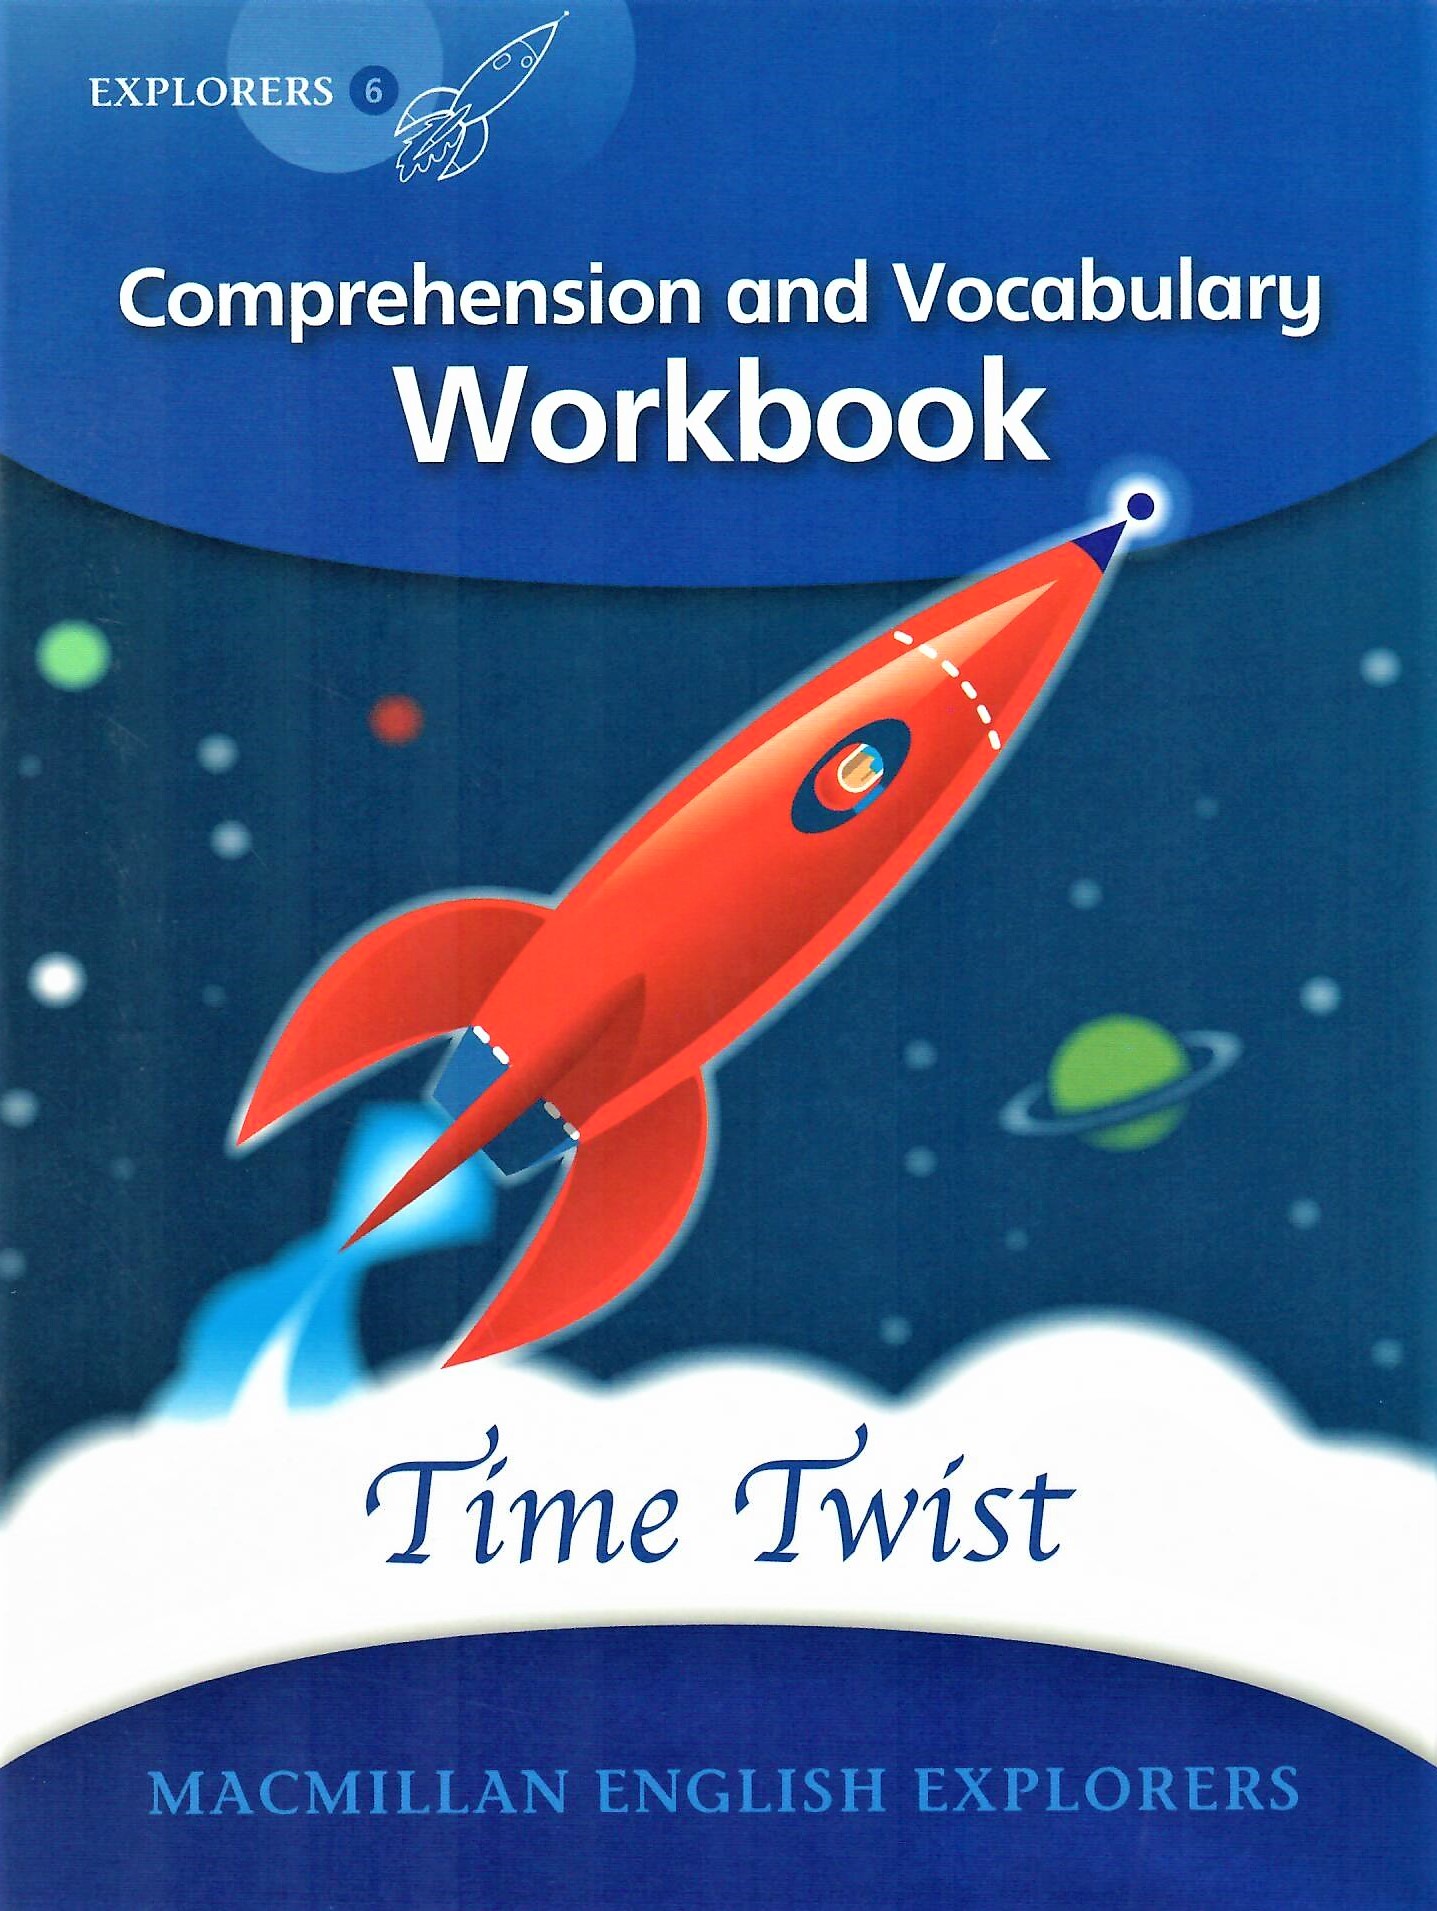 Young Explorers 6 Time Twist Workbook